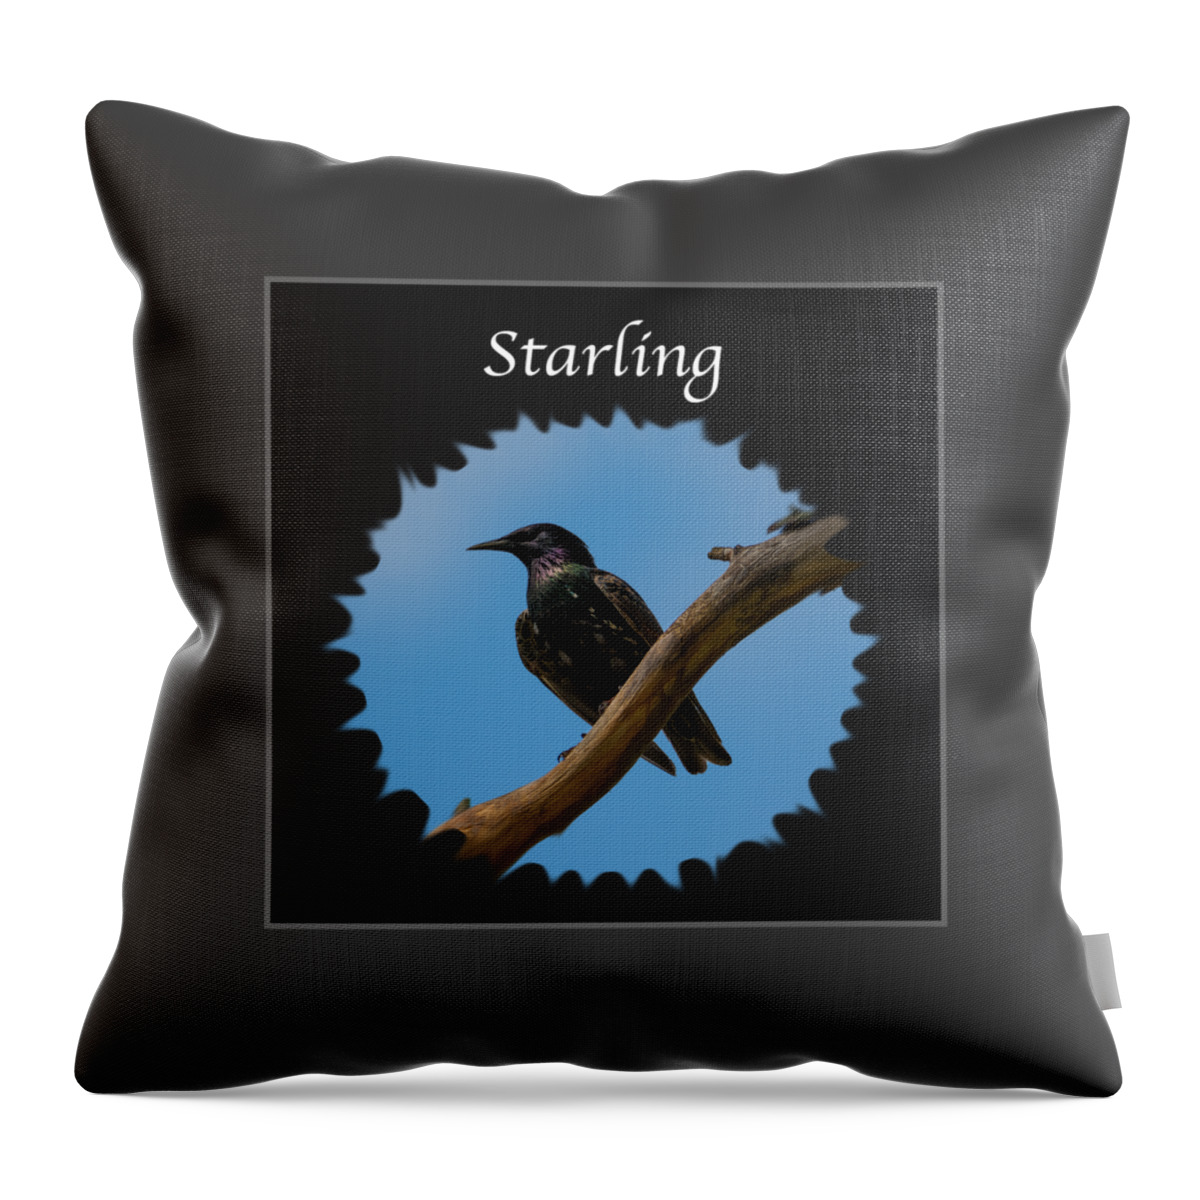 Starling Throw Pillow featuring the photograph Starling  by Holden The Moment